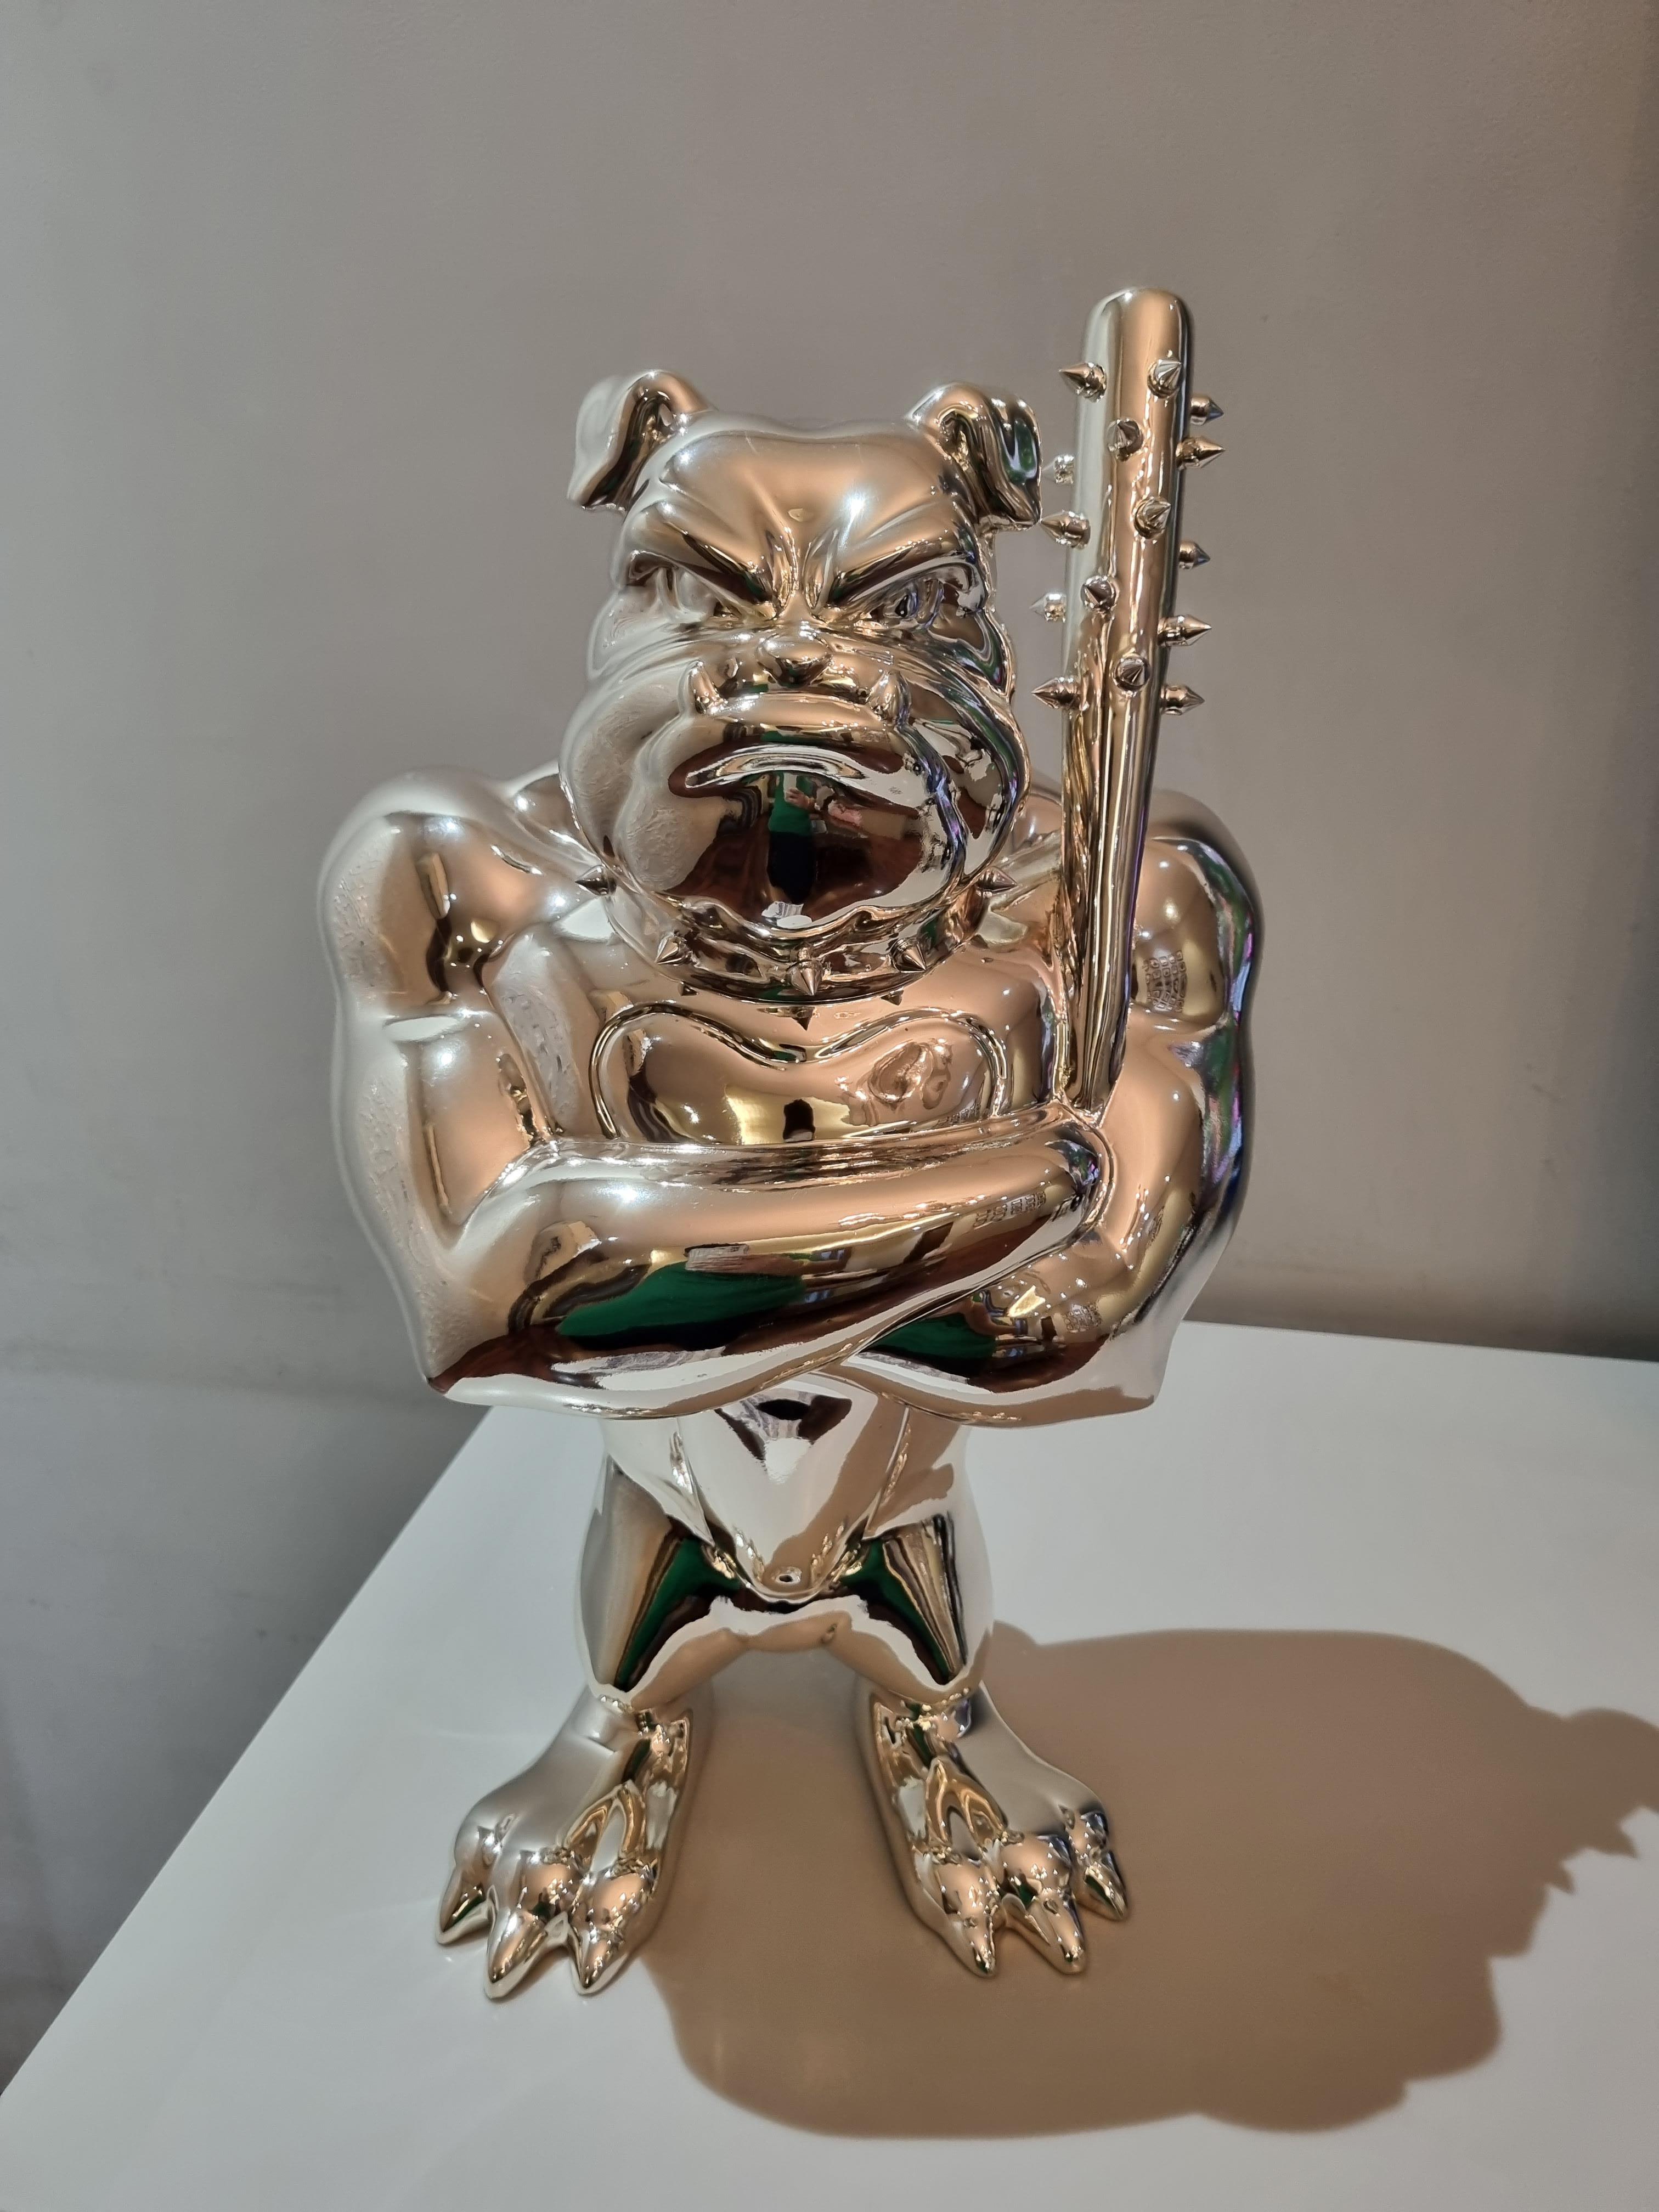 Contemporary pop artists Sanuj Birla rendered this sculpture to be full of character and be a homage to iconic characters in pop culture. In this particular sculpture Birla has depicted a dog in an expressive stance taking on the qualities of